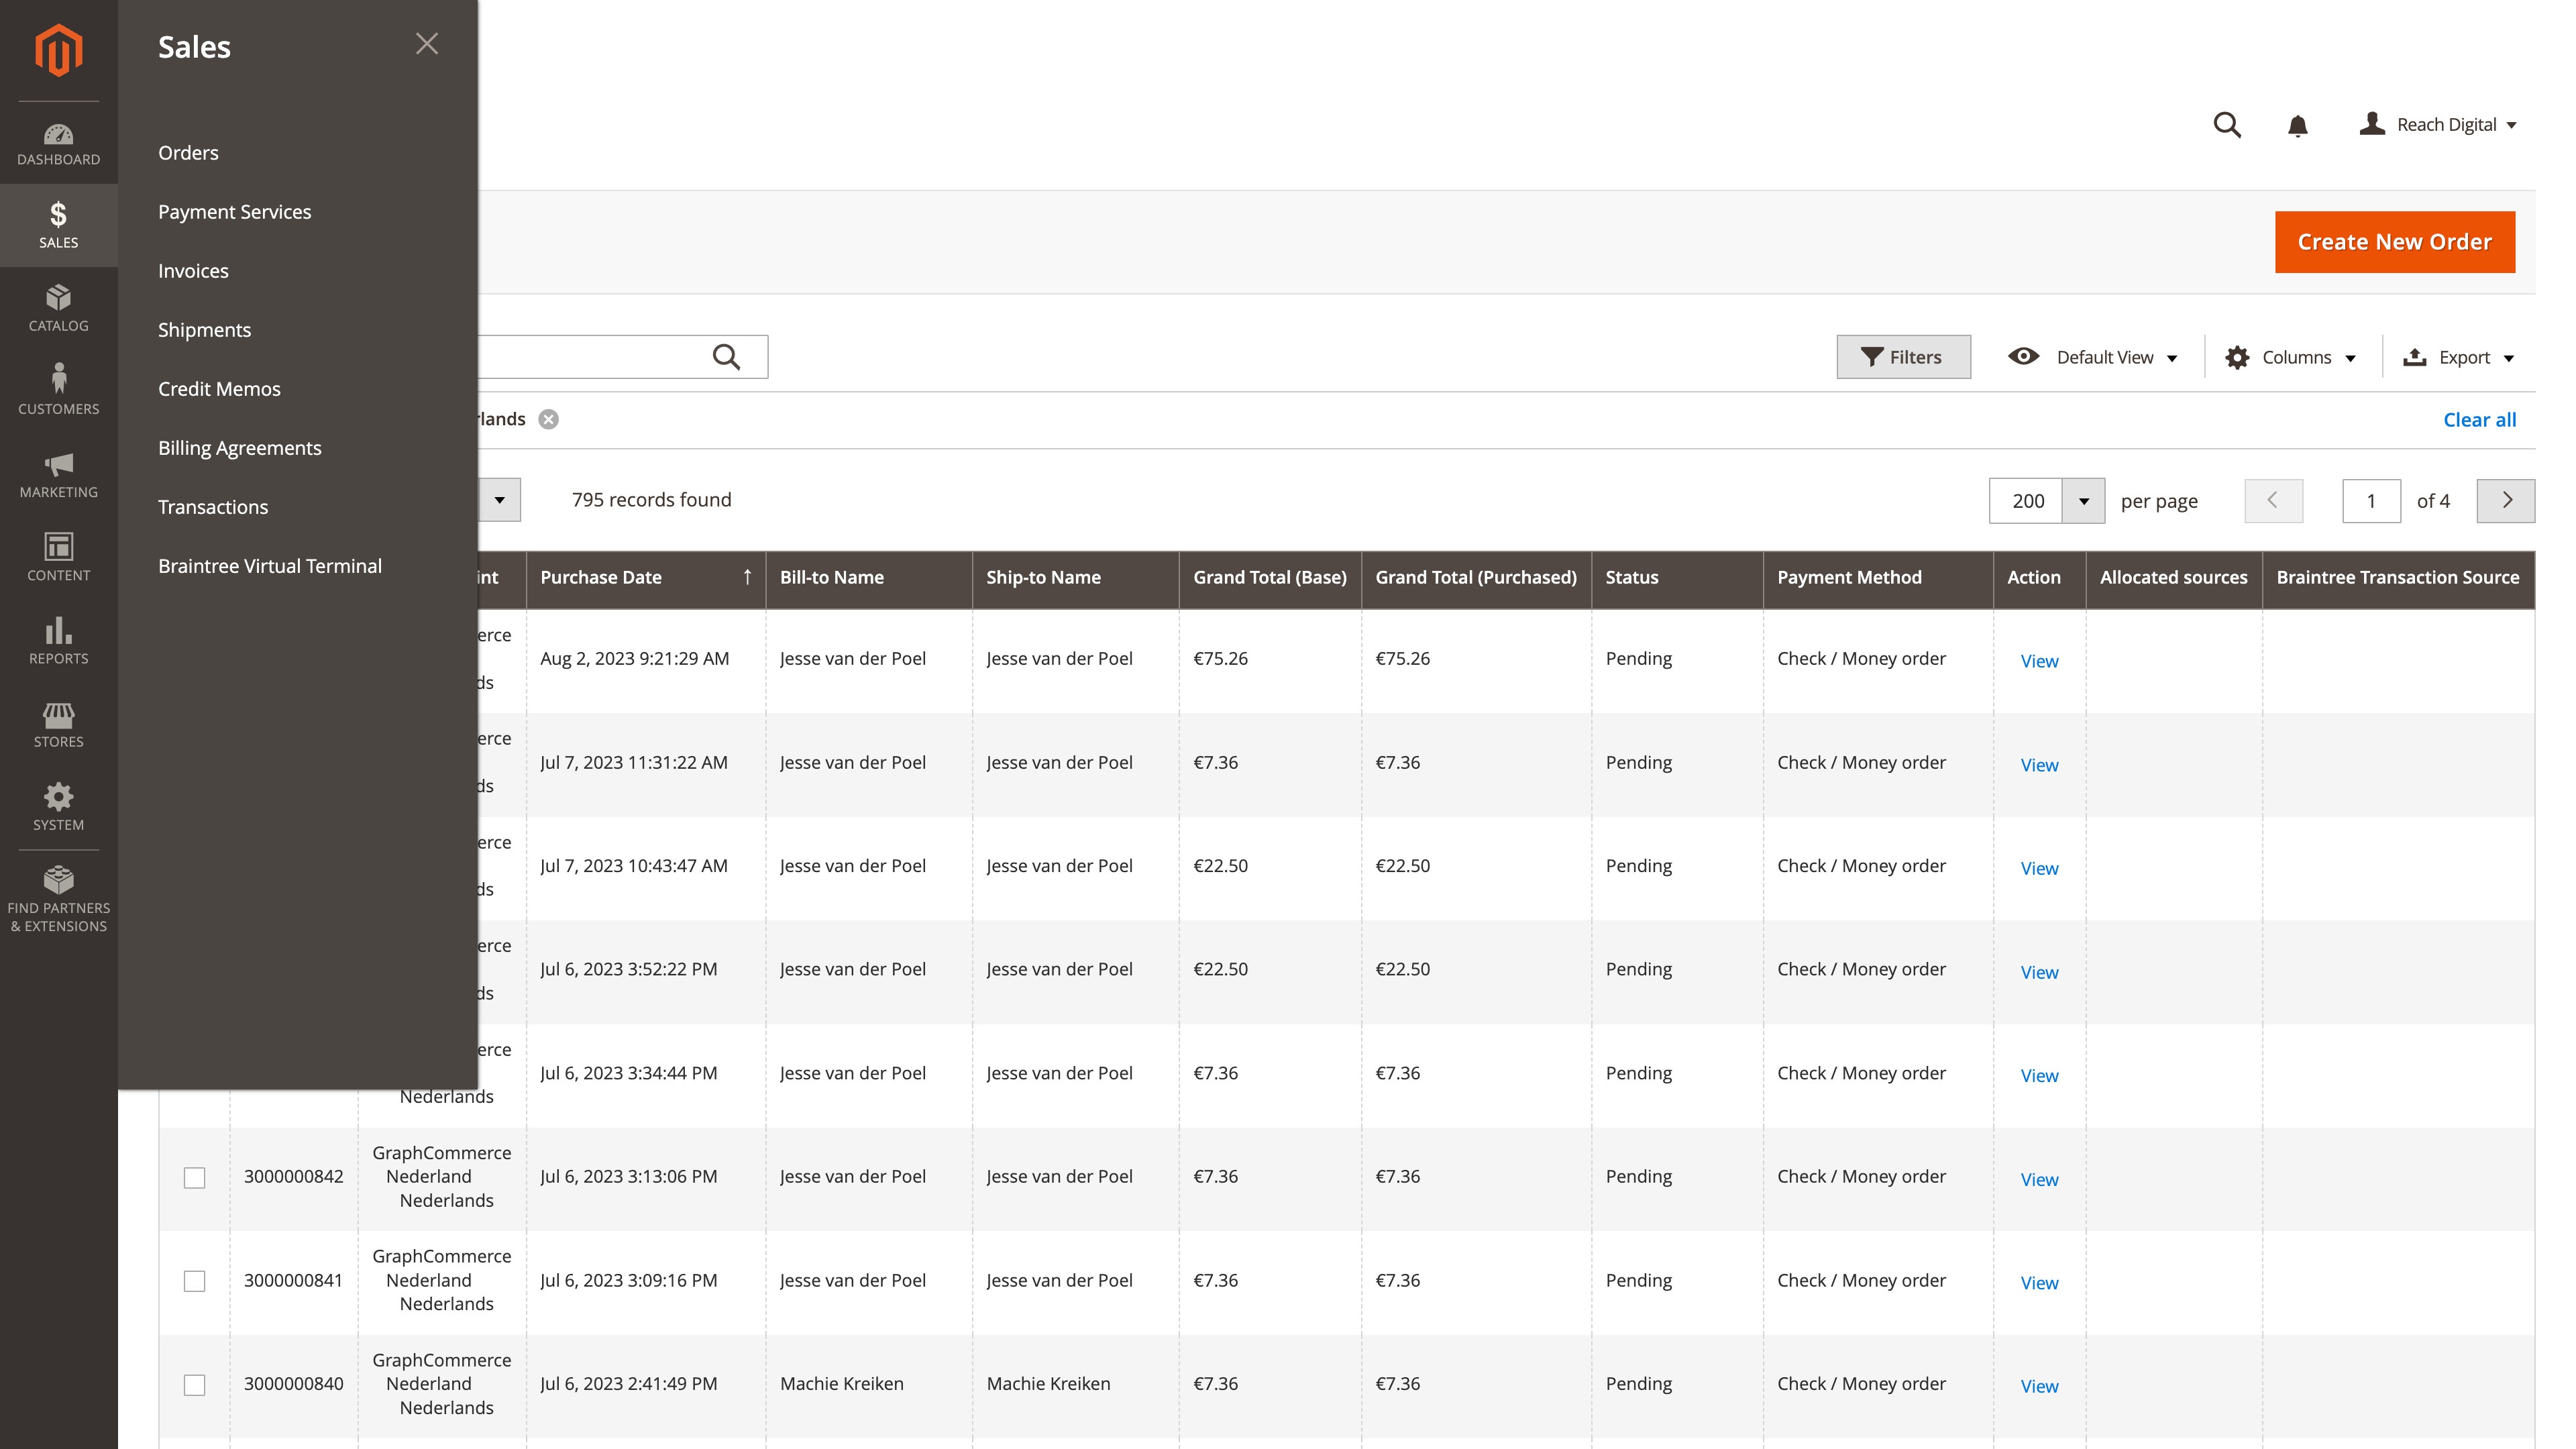 Sales overview in Magento 2.4.7 admin panel